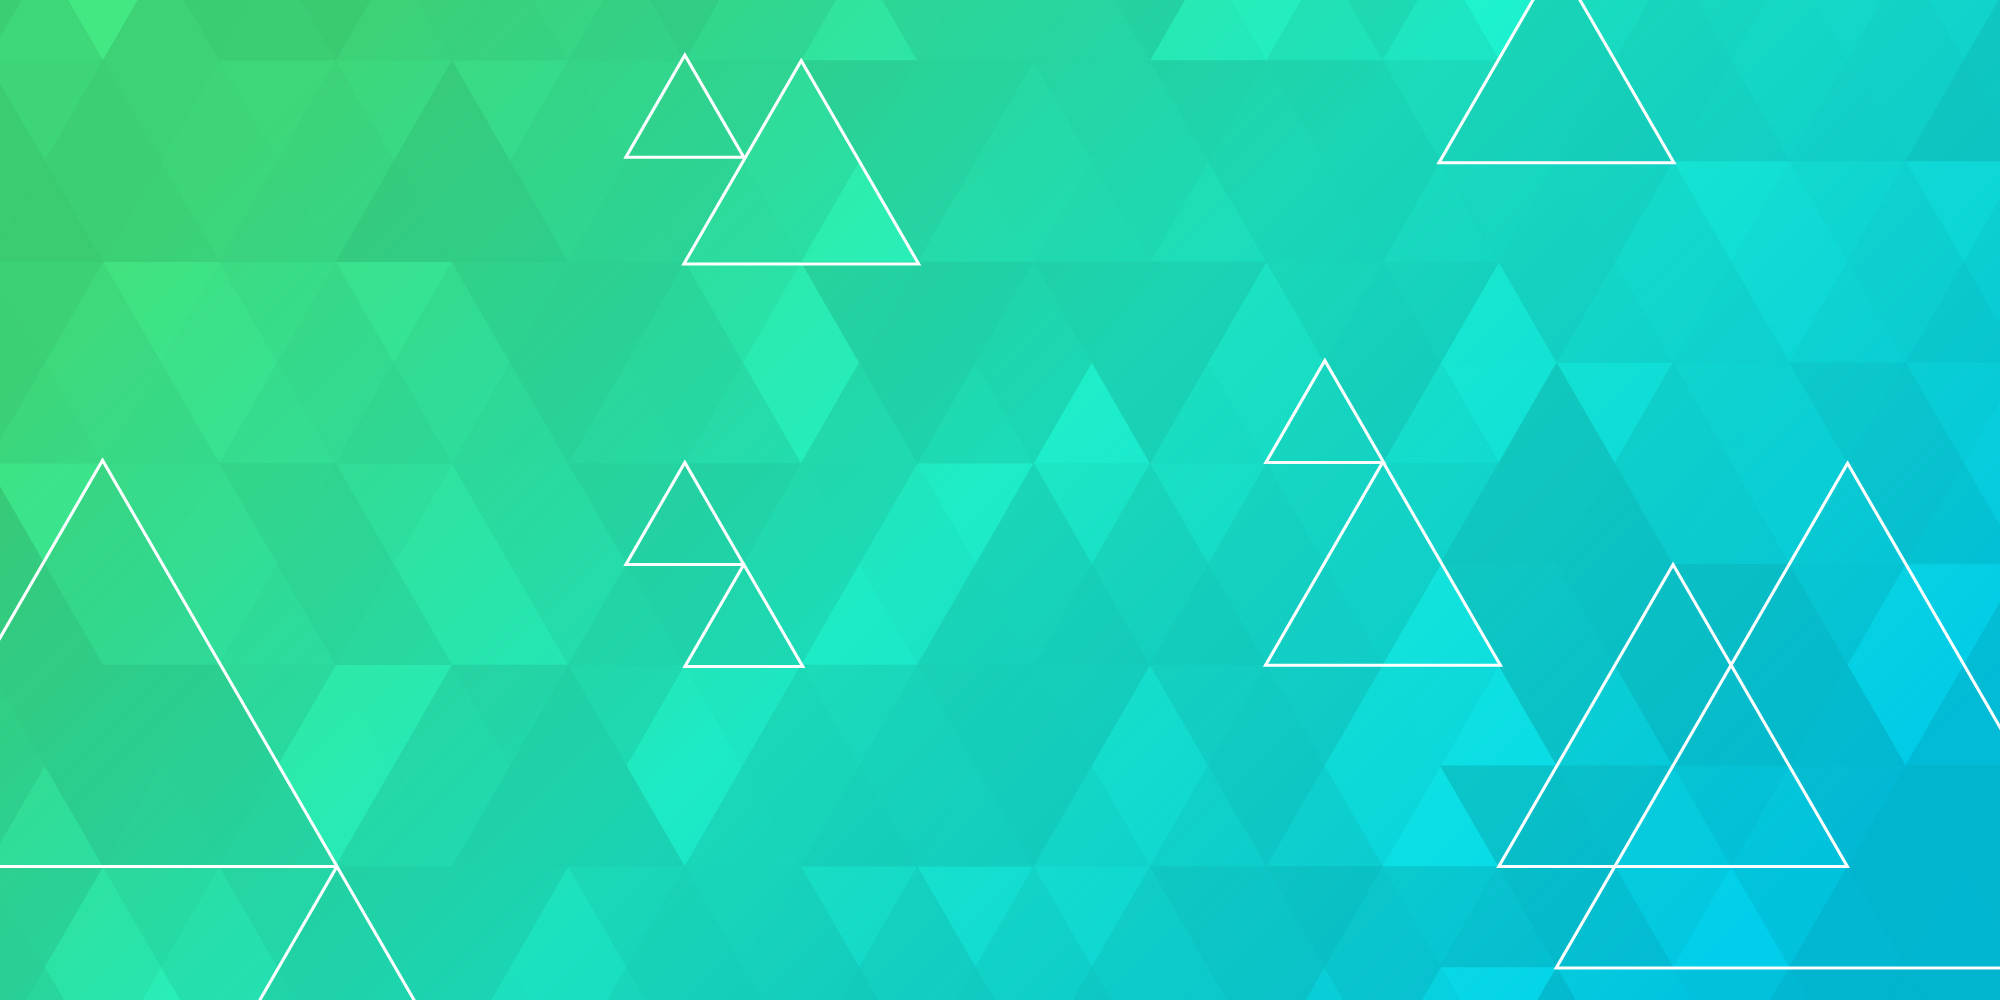 Blue teal and green triangular pattern